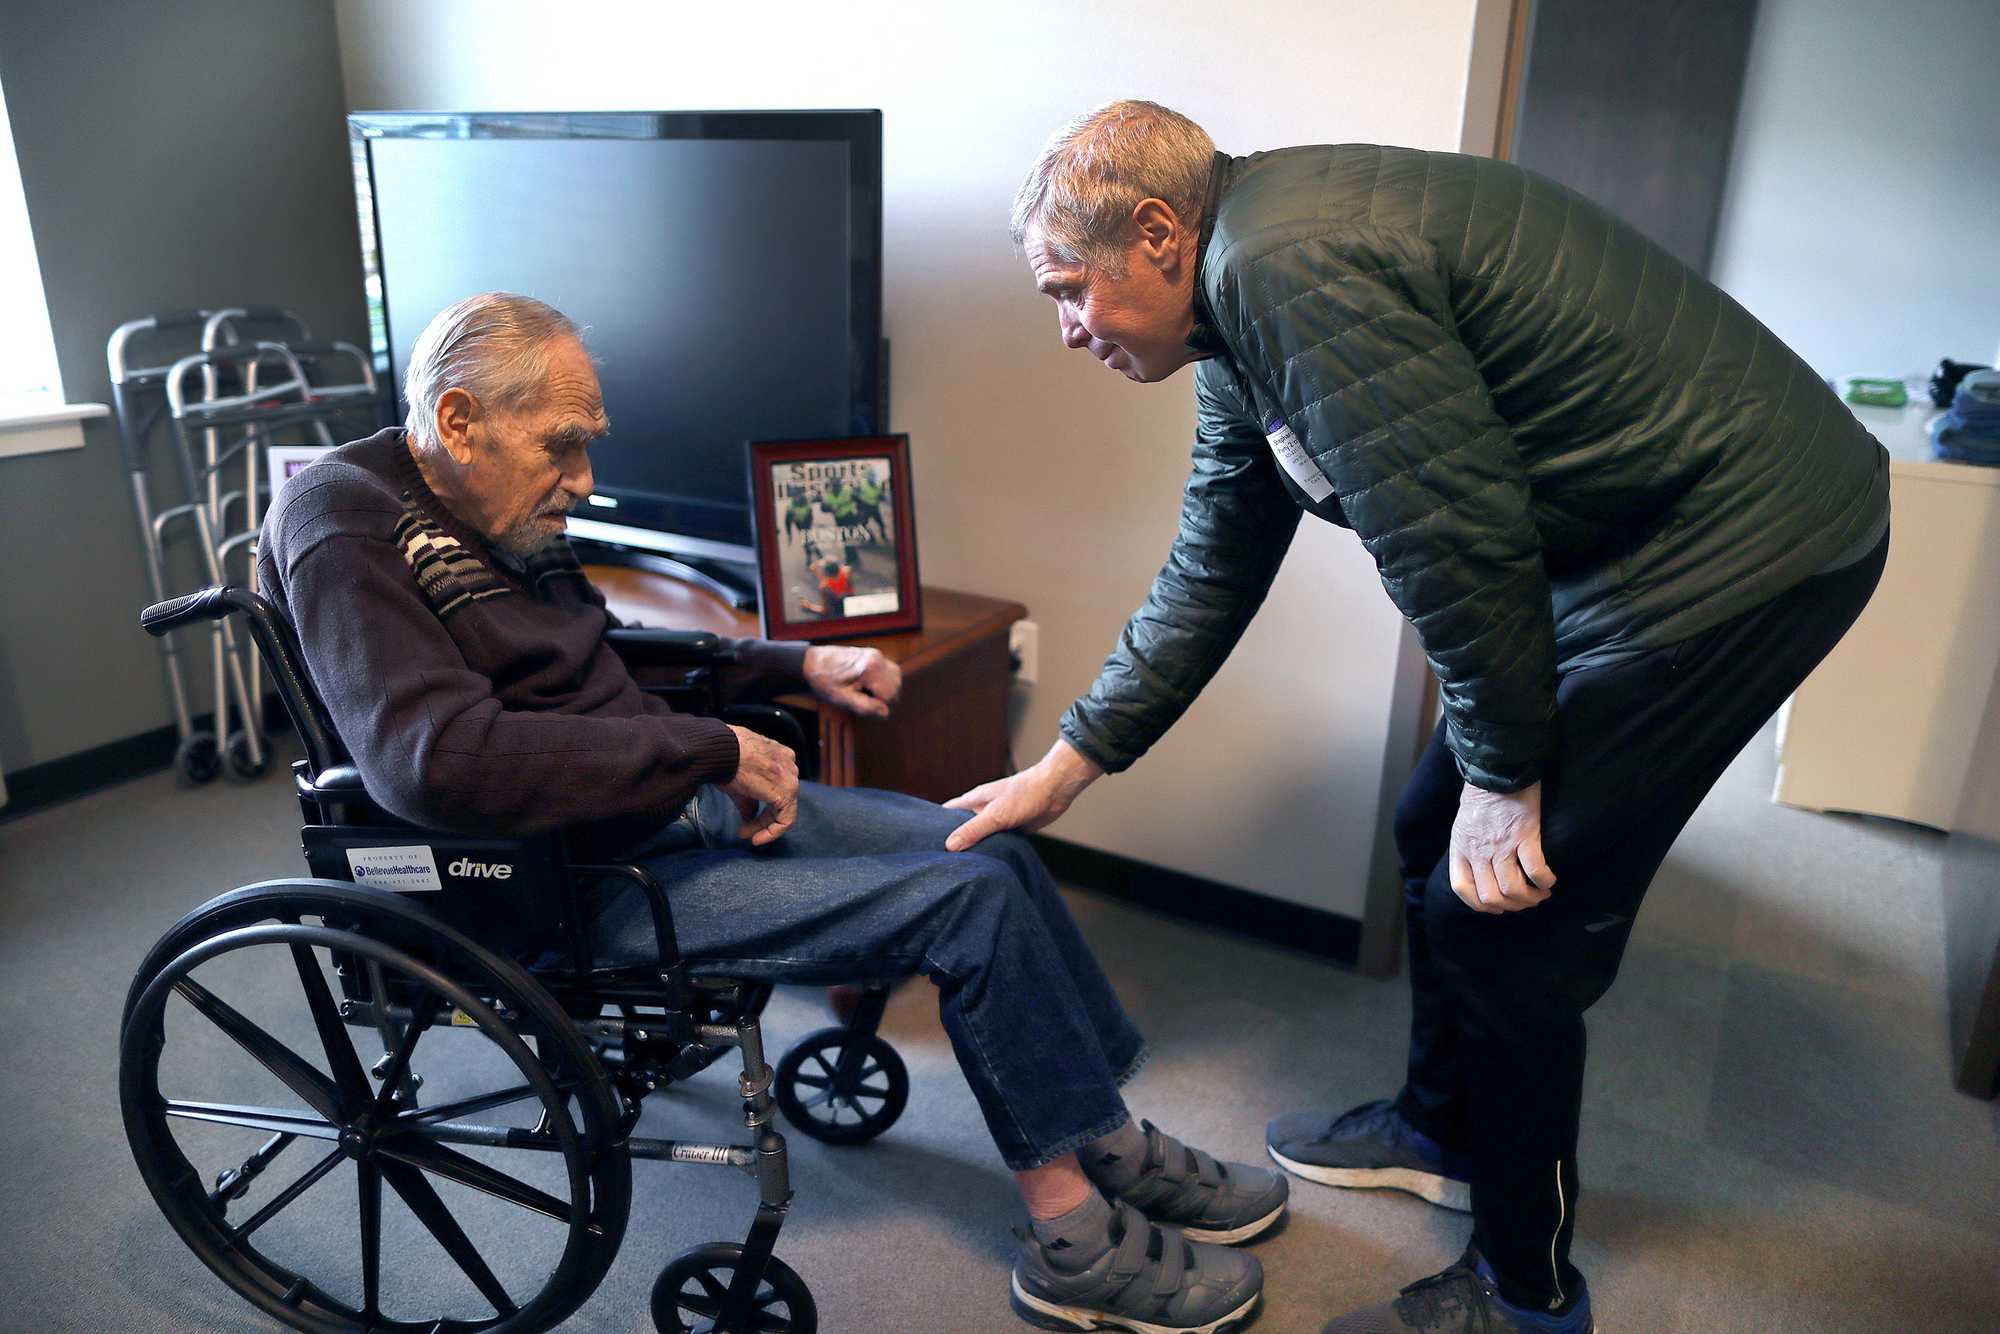 Mark Iffrig tried to wake up his dad, Bill Iffrig, 88, who was napping in his wheelchair in his room at Fieldstone Memory Care Since in Marysville, Wash.